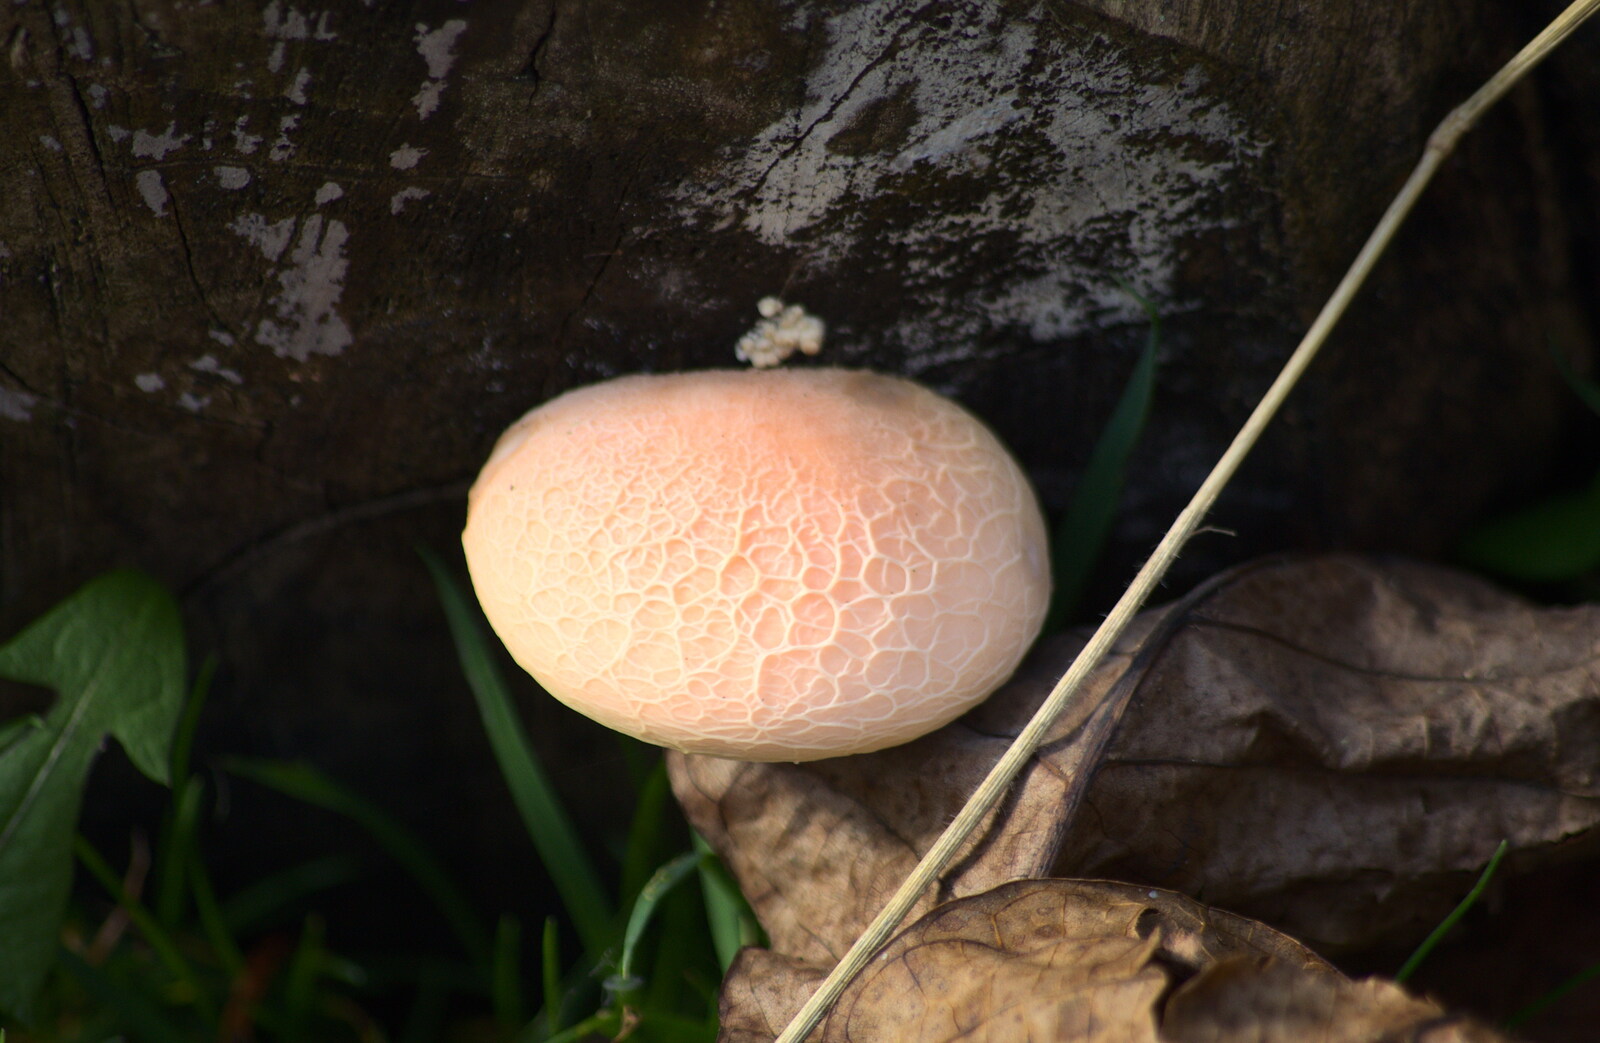 An amazing mushroom that looks like tripe from Another Walk around Thornham Estate, Suffolk - 27th October 2014